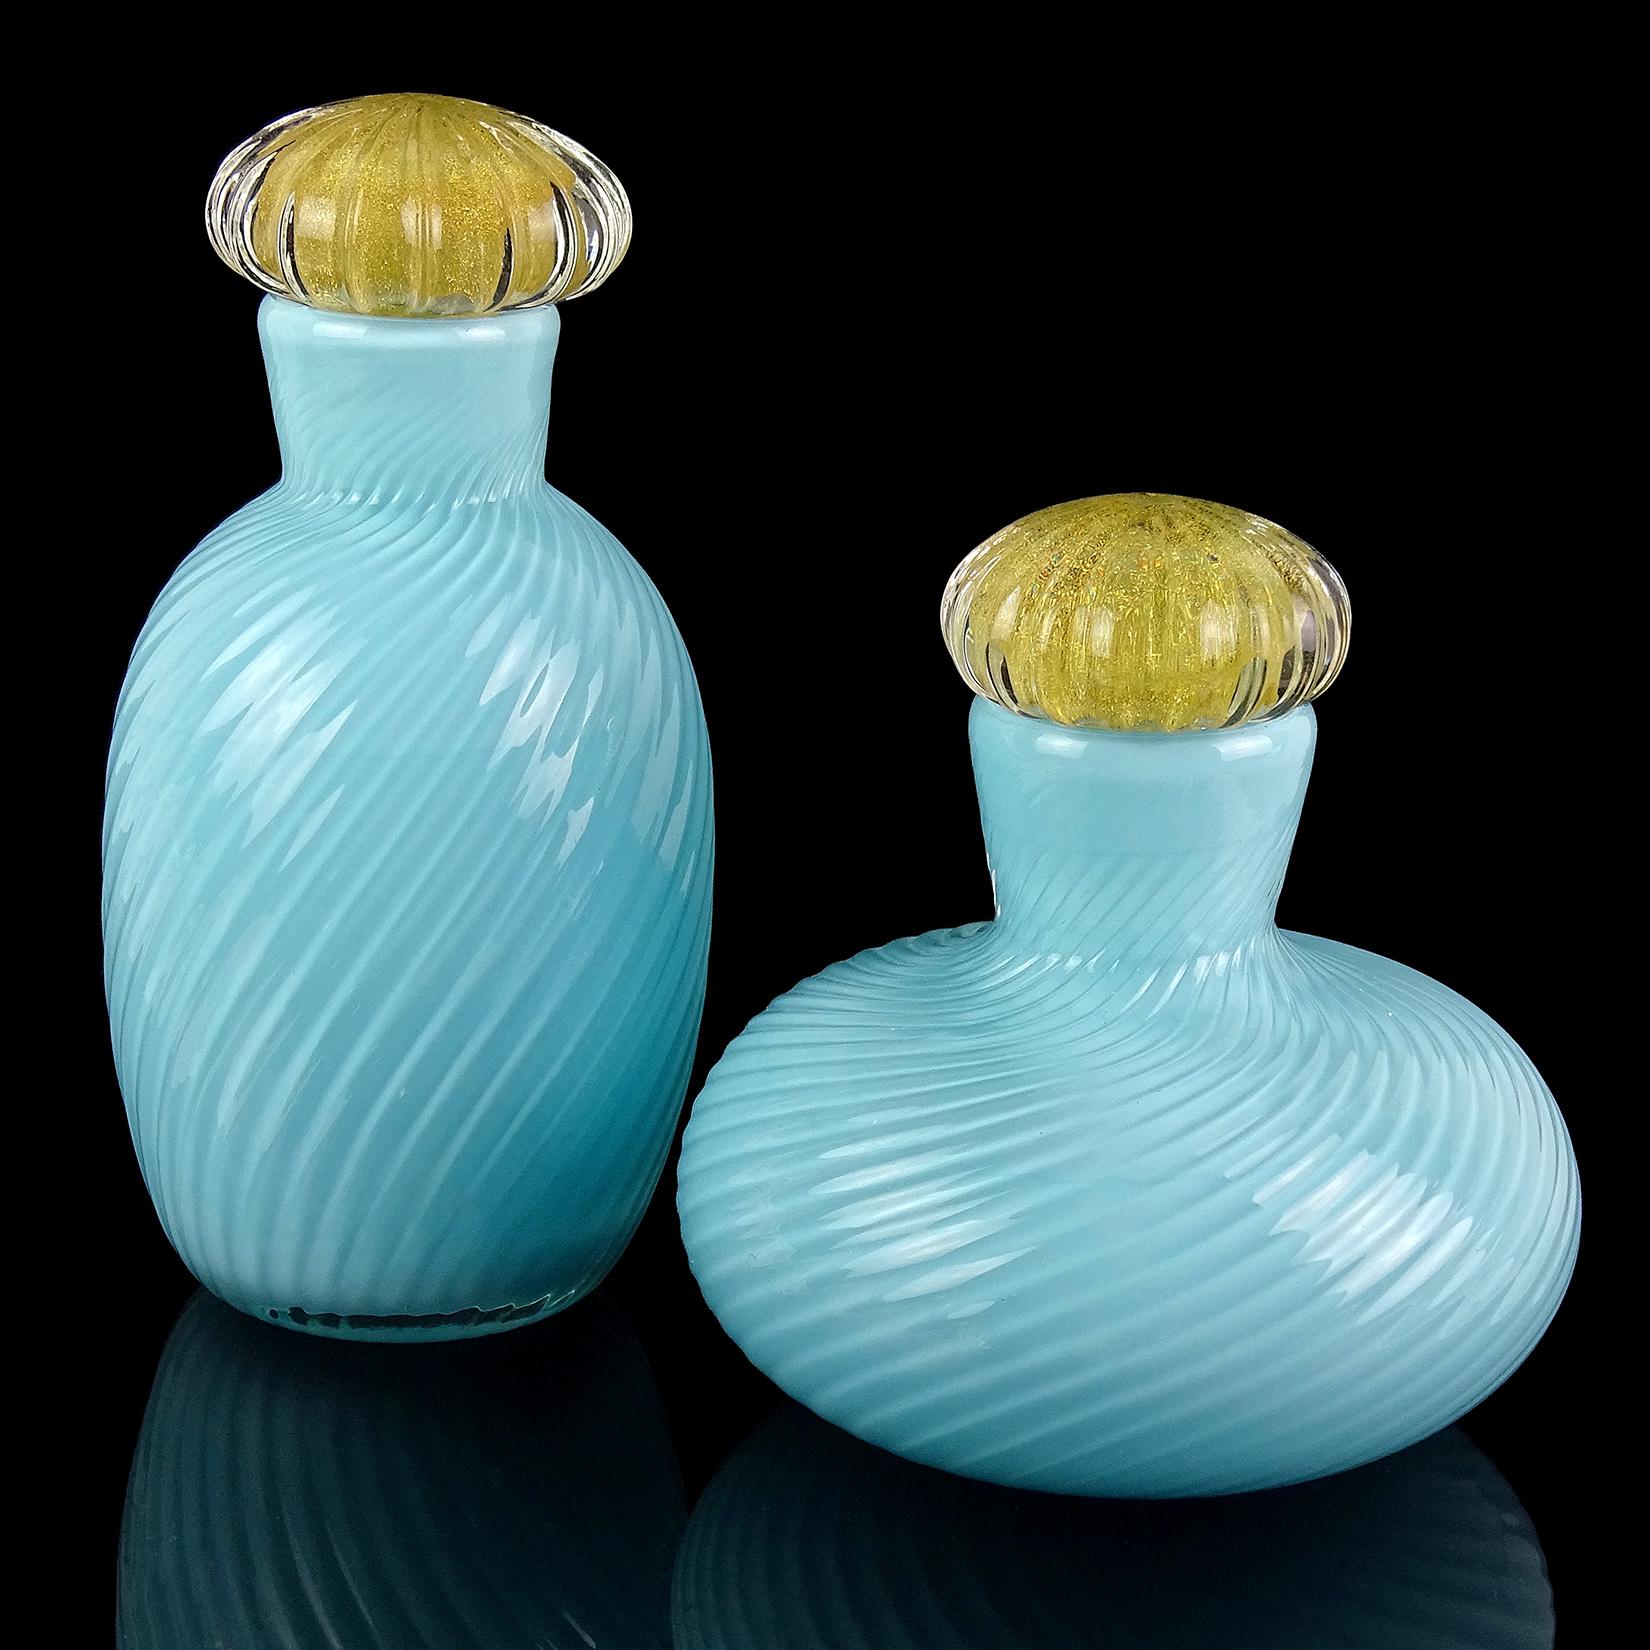 Beautiful vintage Murano hand blown Sommerso light blue Italian art glass vanity / bathroom jars or bottles. The 2 pieces are signed underneath 